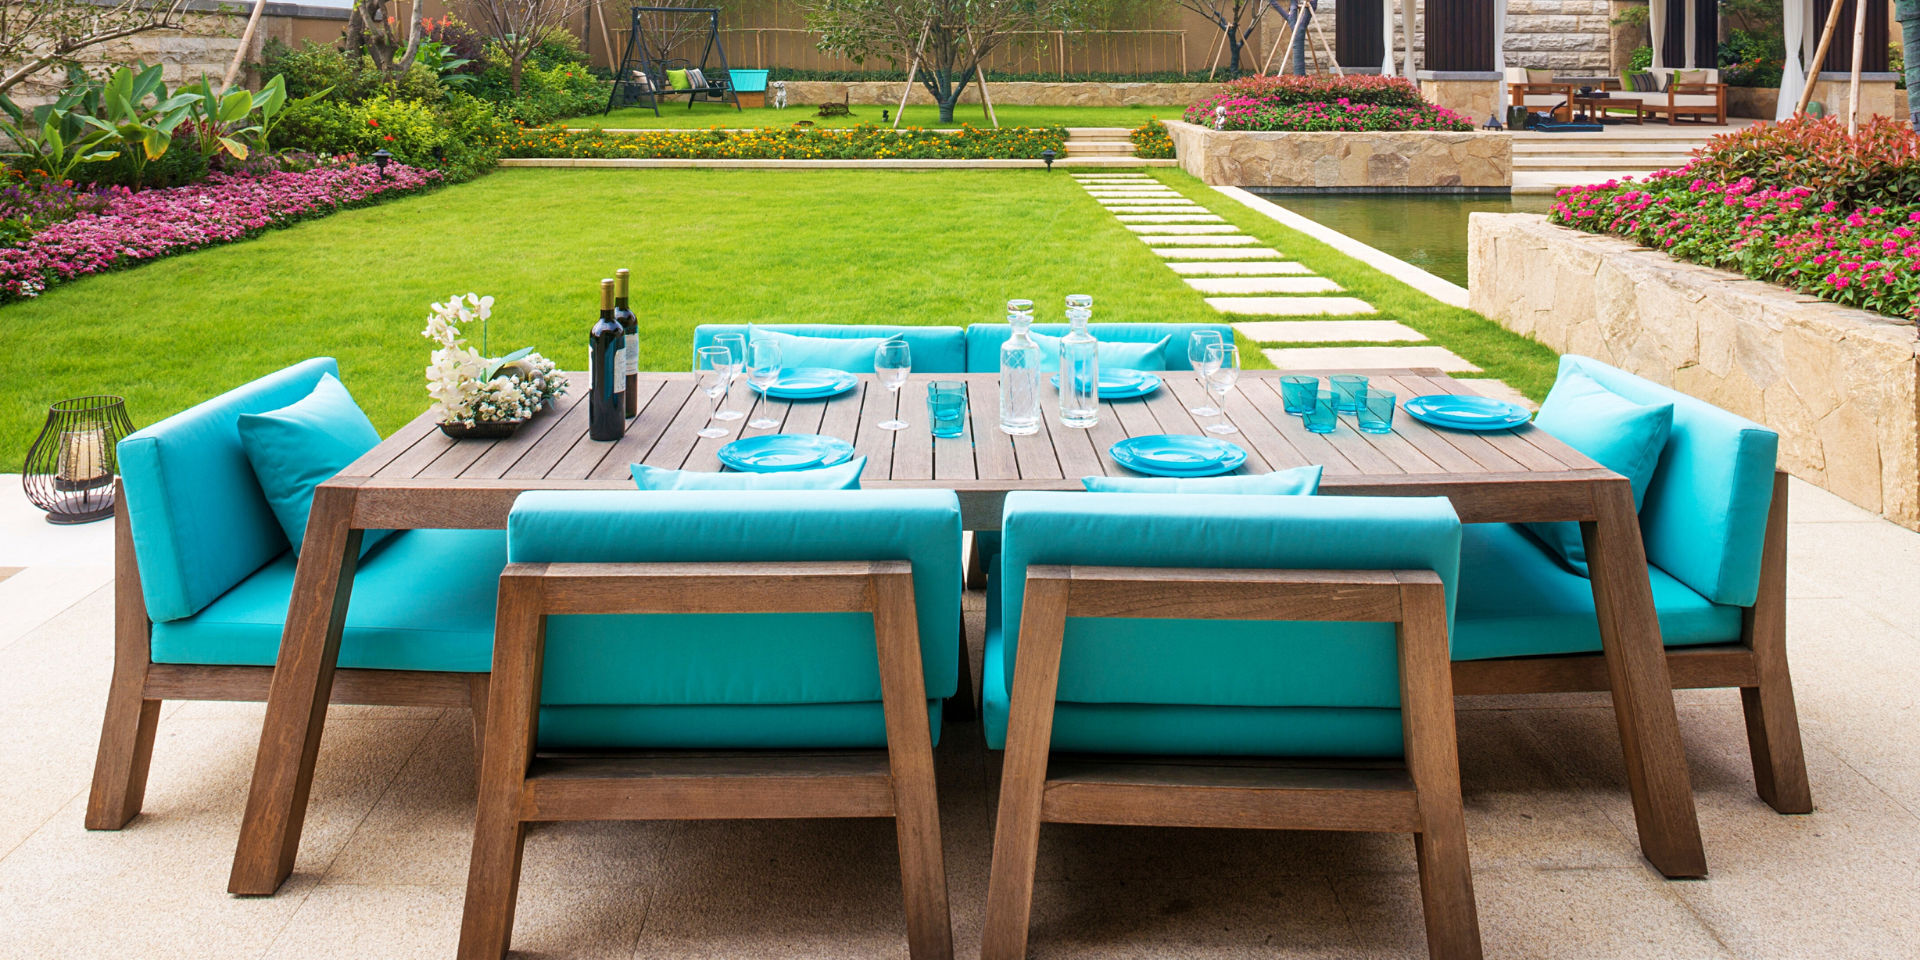 New turqoise garden furniture cushions by Frey Casa are custom made to compliment your garden style. Perfect for family time.